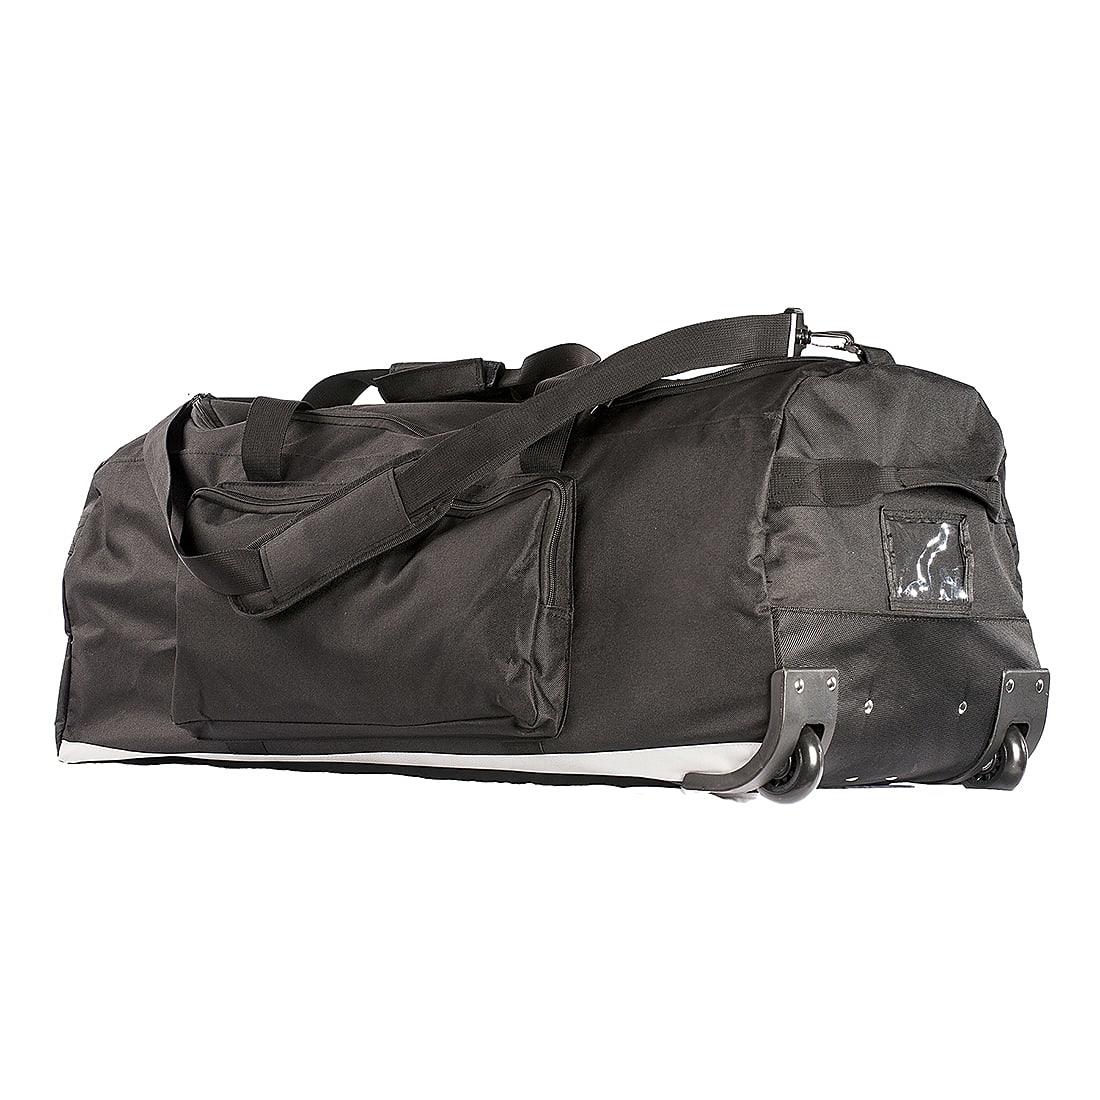 Portwest Travel Trolley Bag in Black (Product Code: B909)